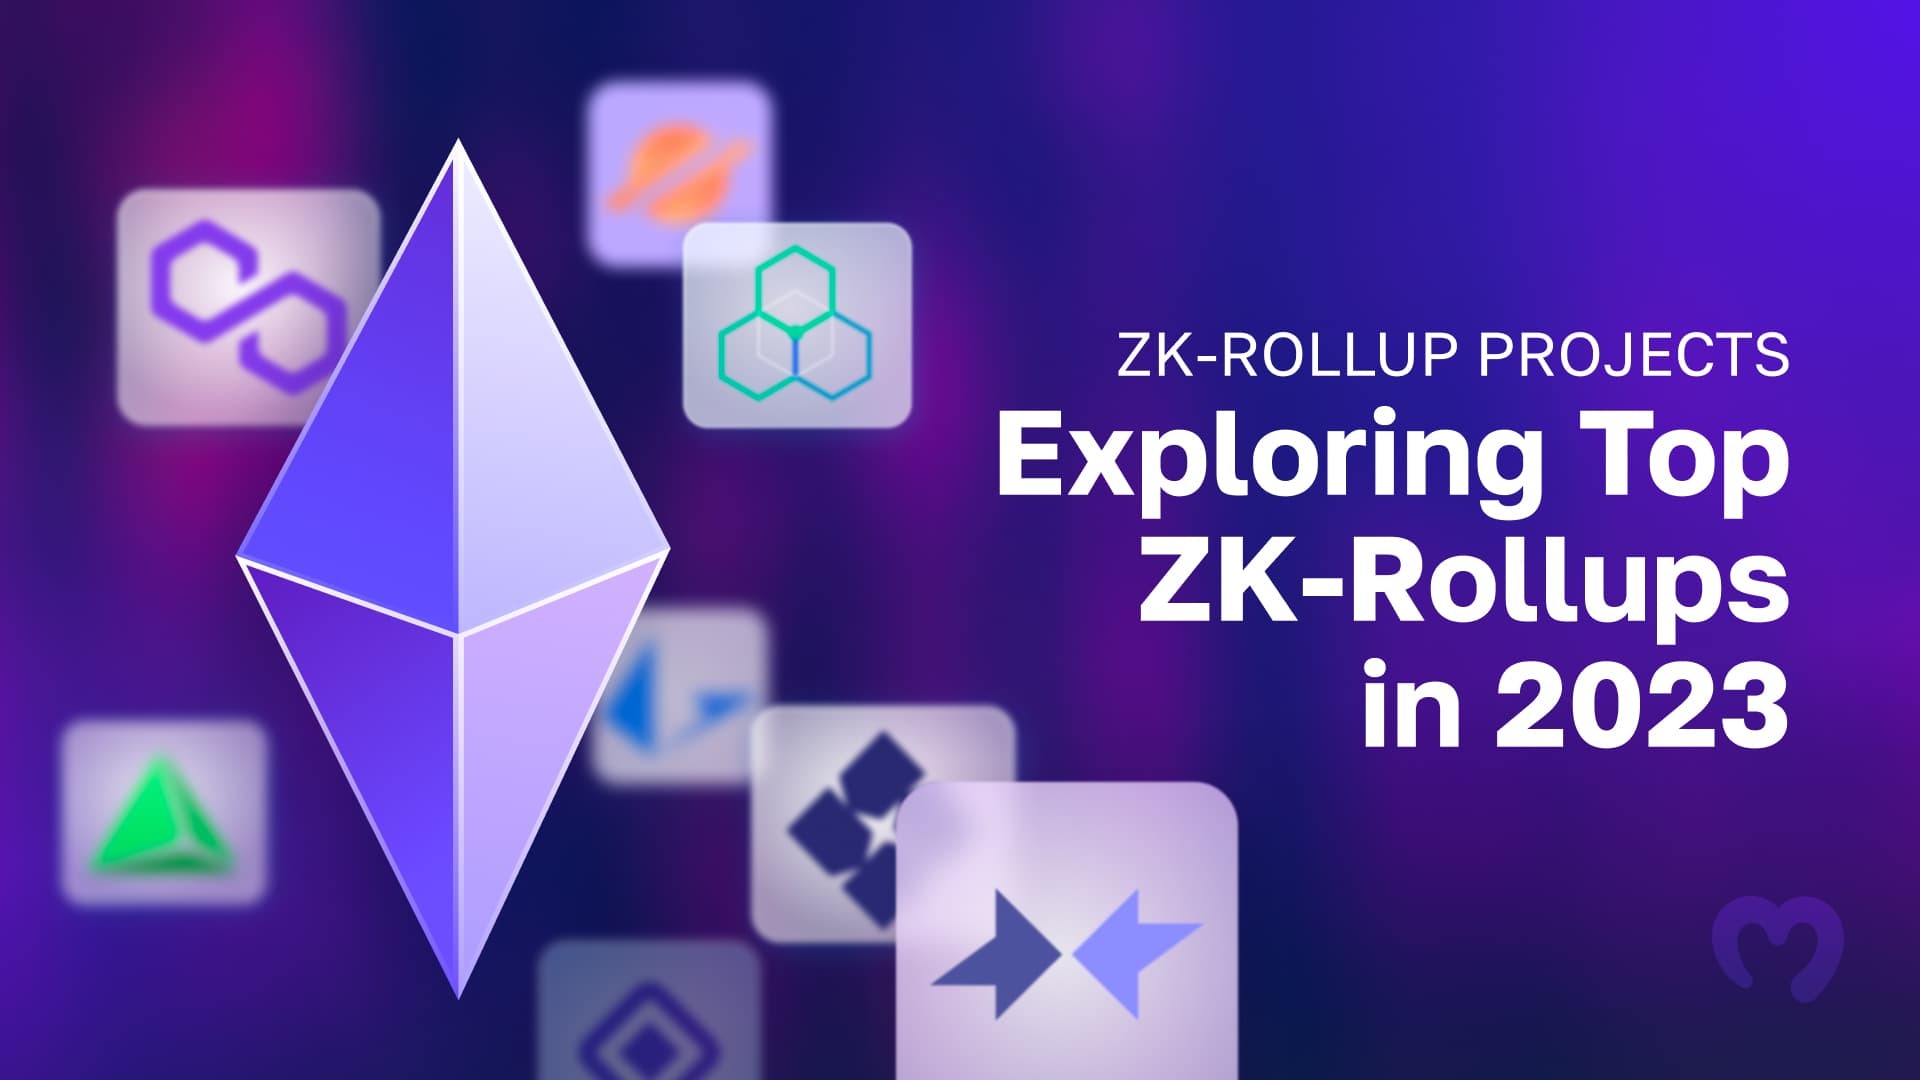 ZK-Rollup Projects - Exploring Top ZK-Rollups in 2023